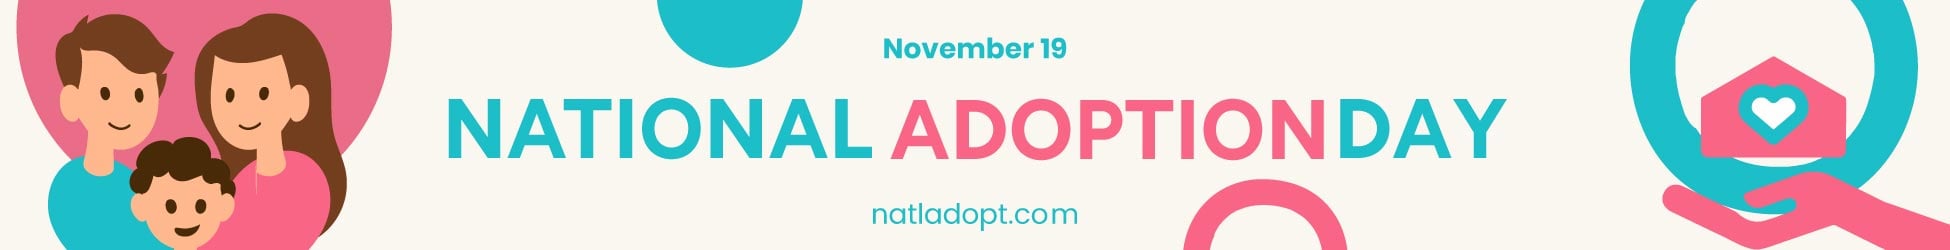 National Adoption Day Banners